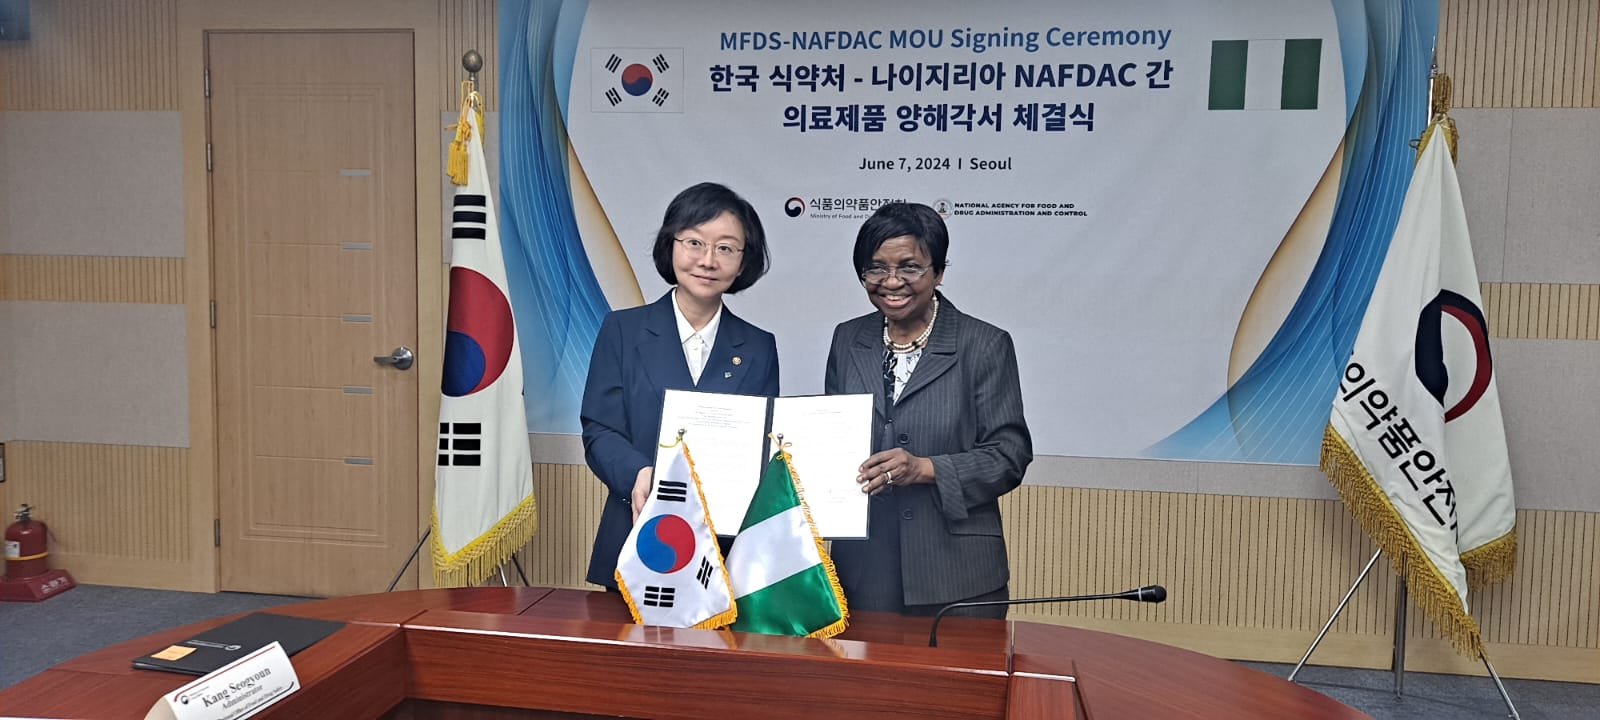 Breaking: NAFDAC DG Signs MOU With South Korea to Boost Nigeria’s Pharmaceutical Production 